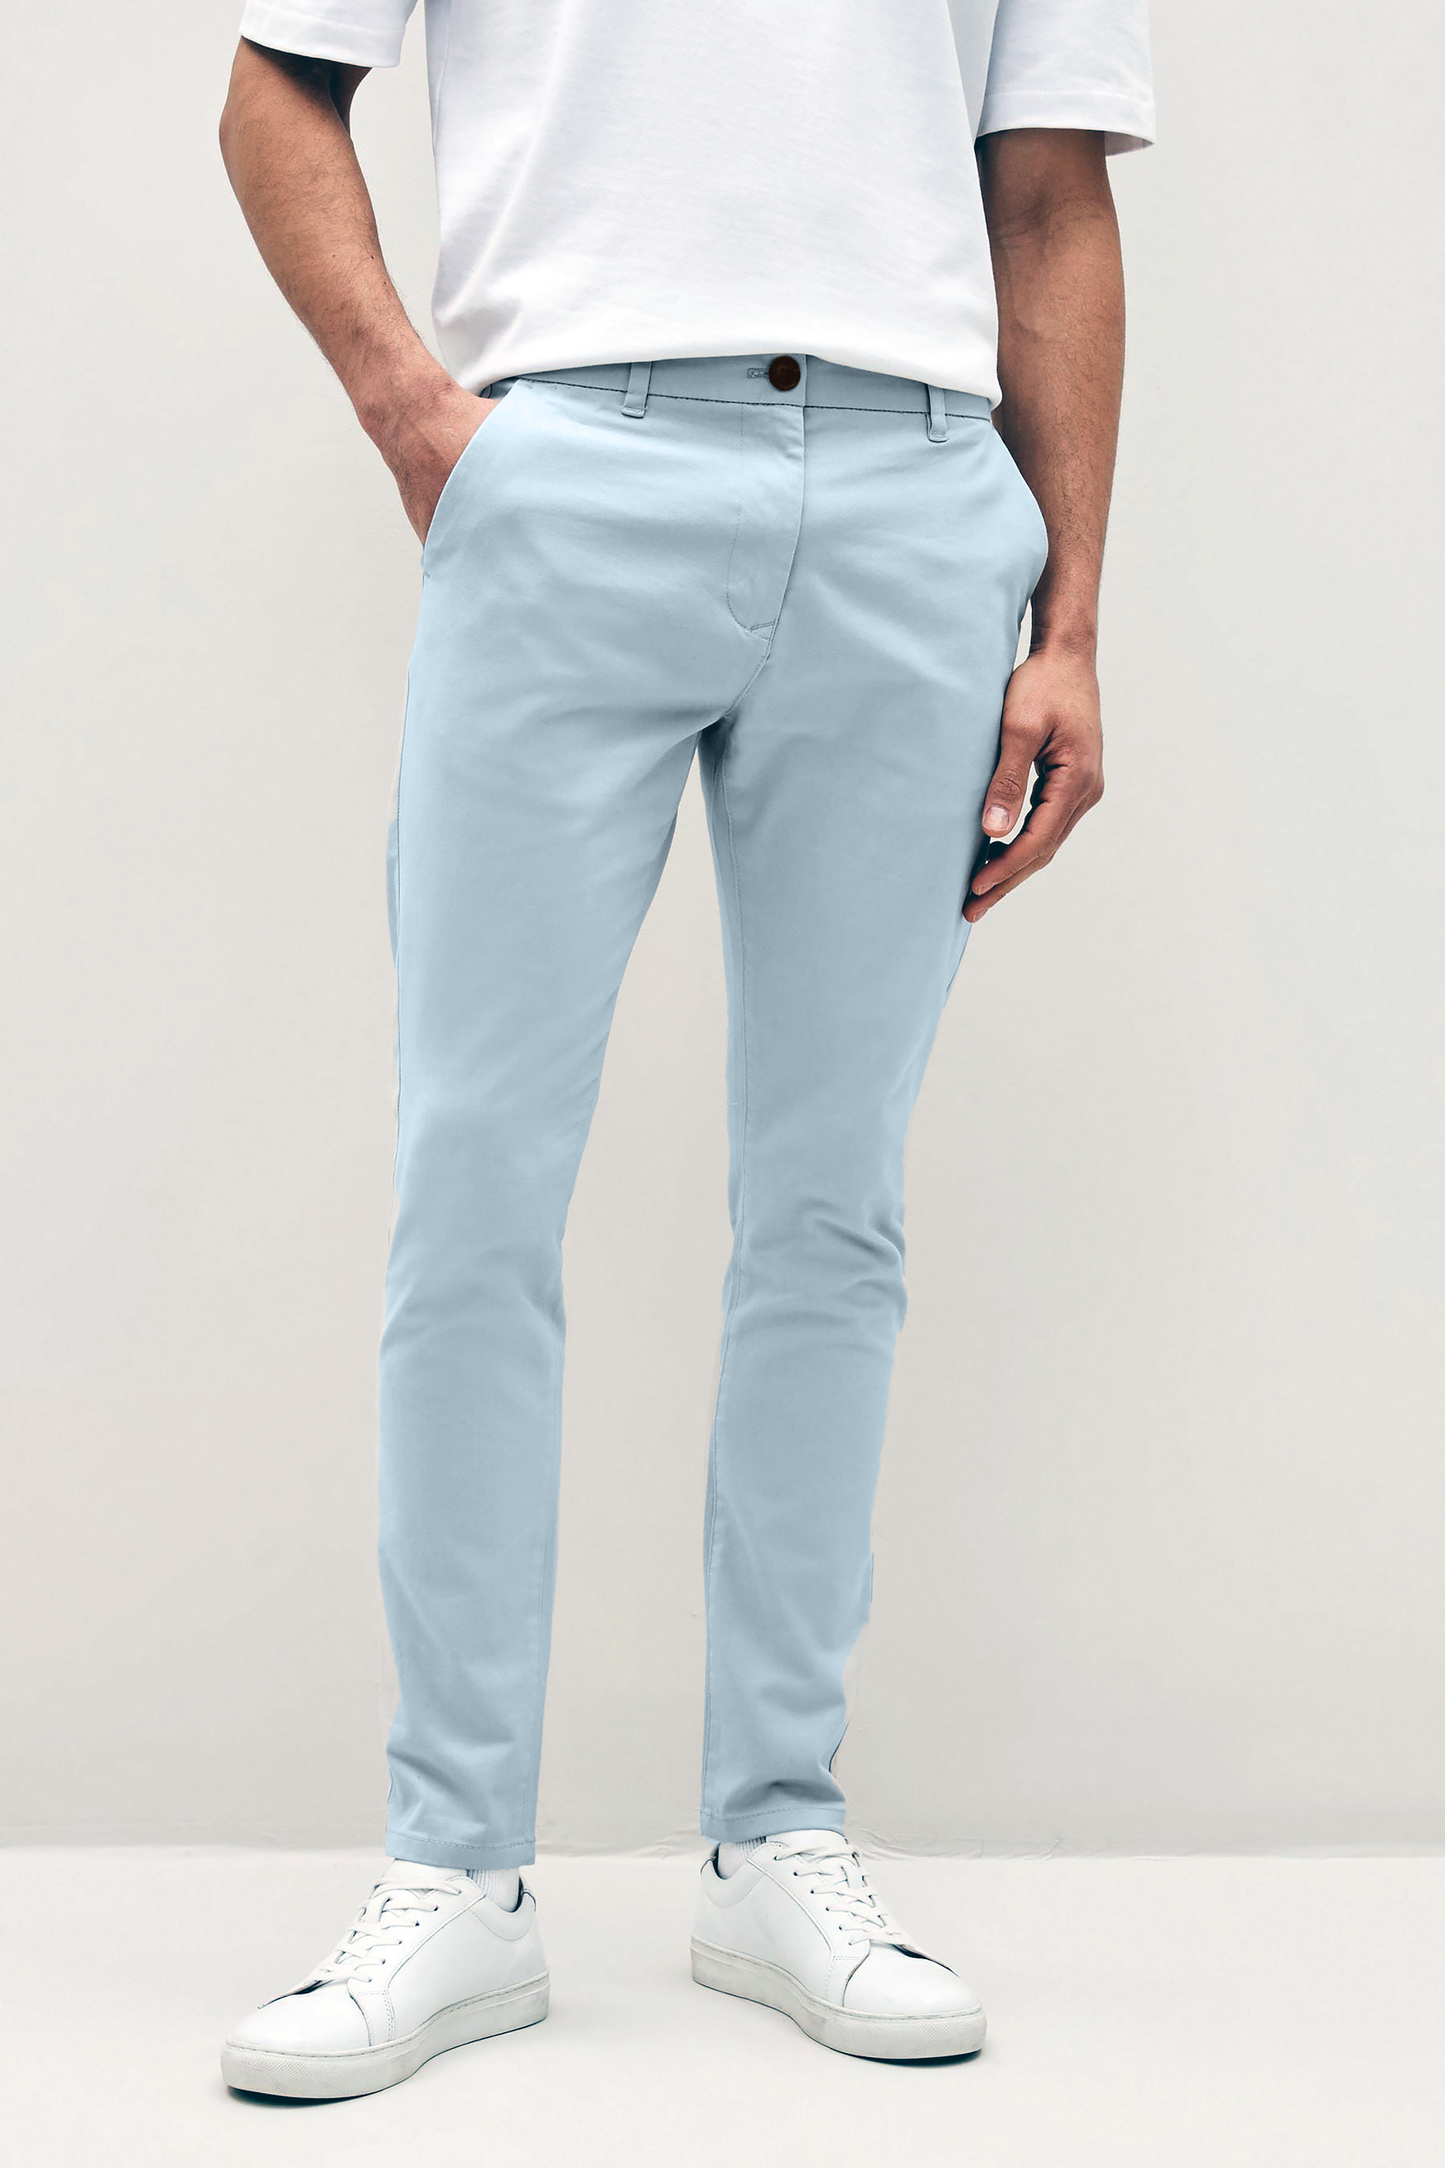 Mens sky Blue chinos with front slanted pockets, jetted back pockets. zip fly fastening and brown horne buttons on the waistband and back pockets, the fit is a slim fit, this is worn with a white tee and white unbranded trainers